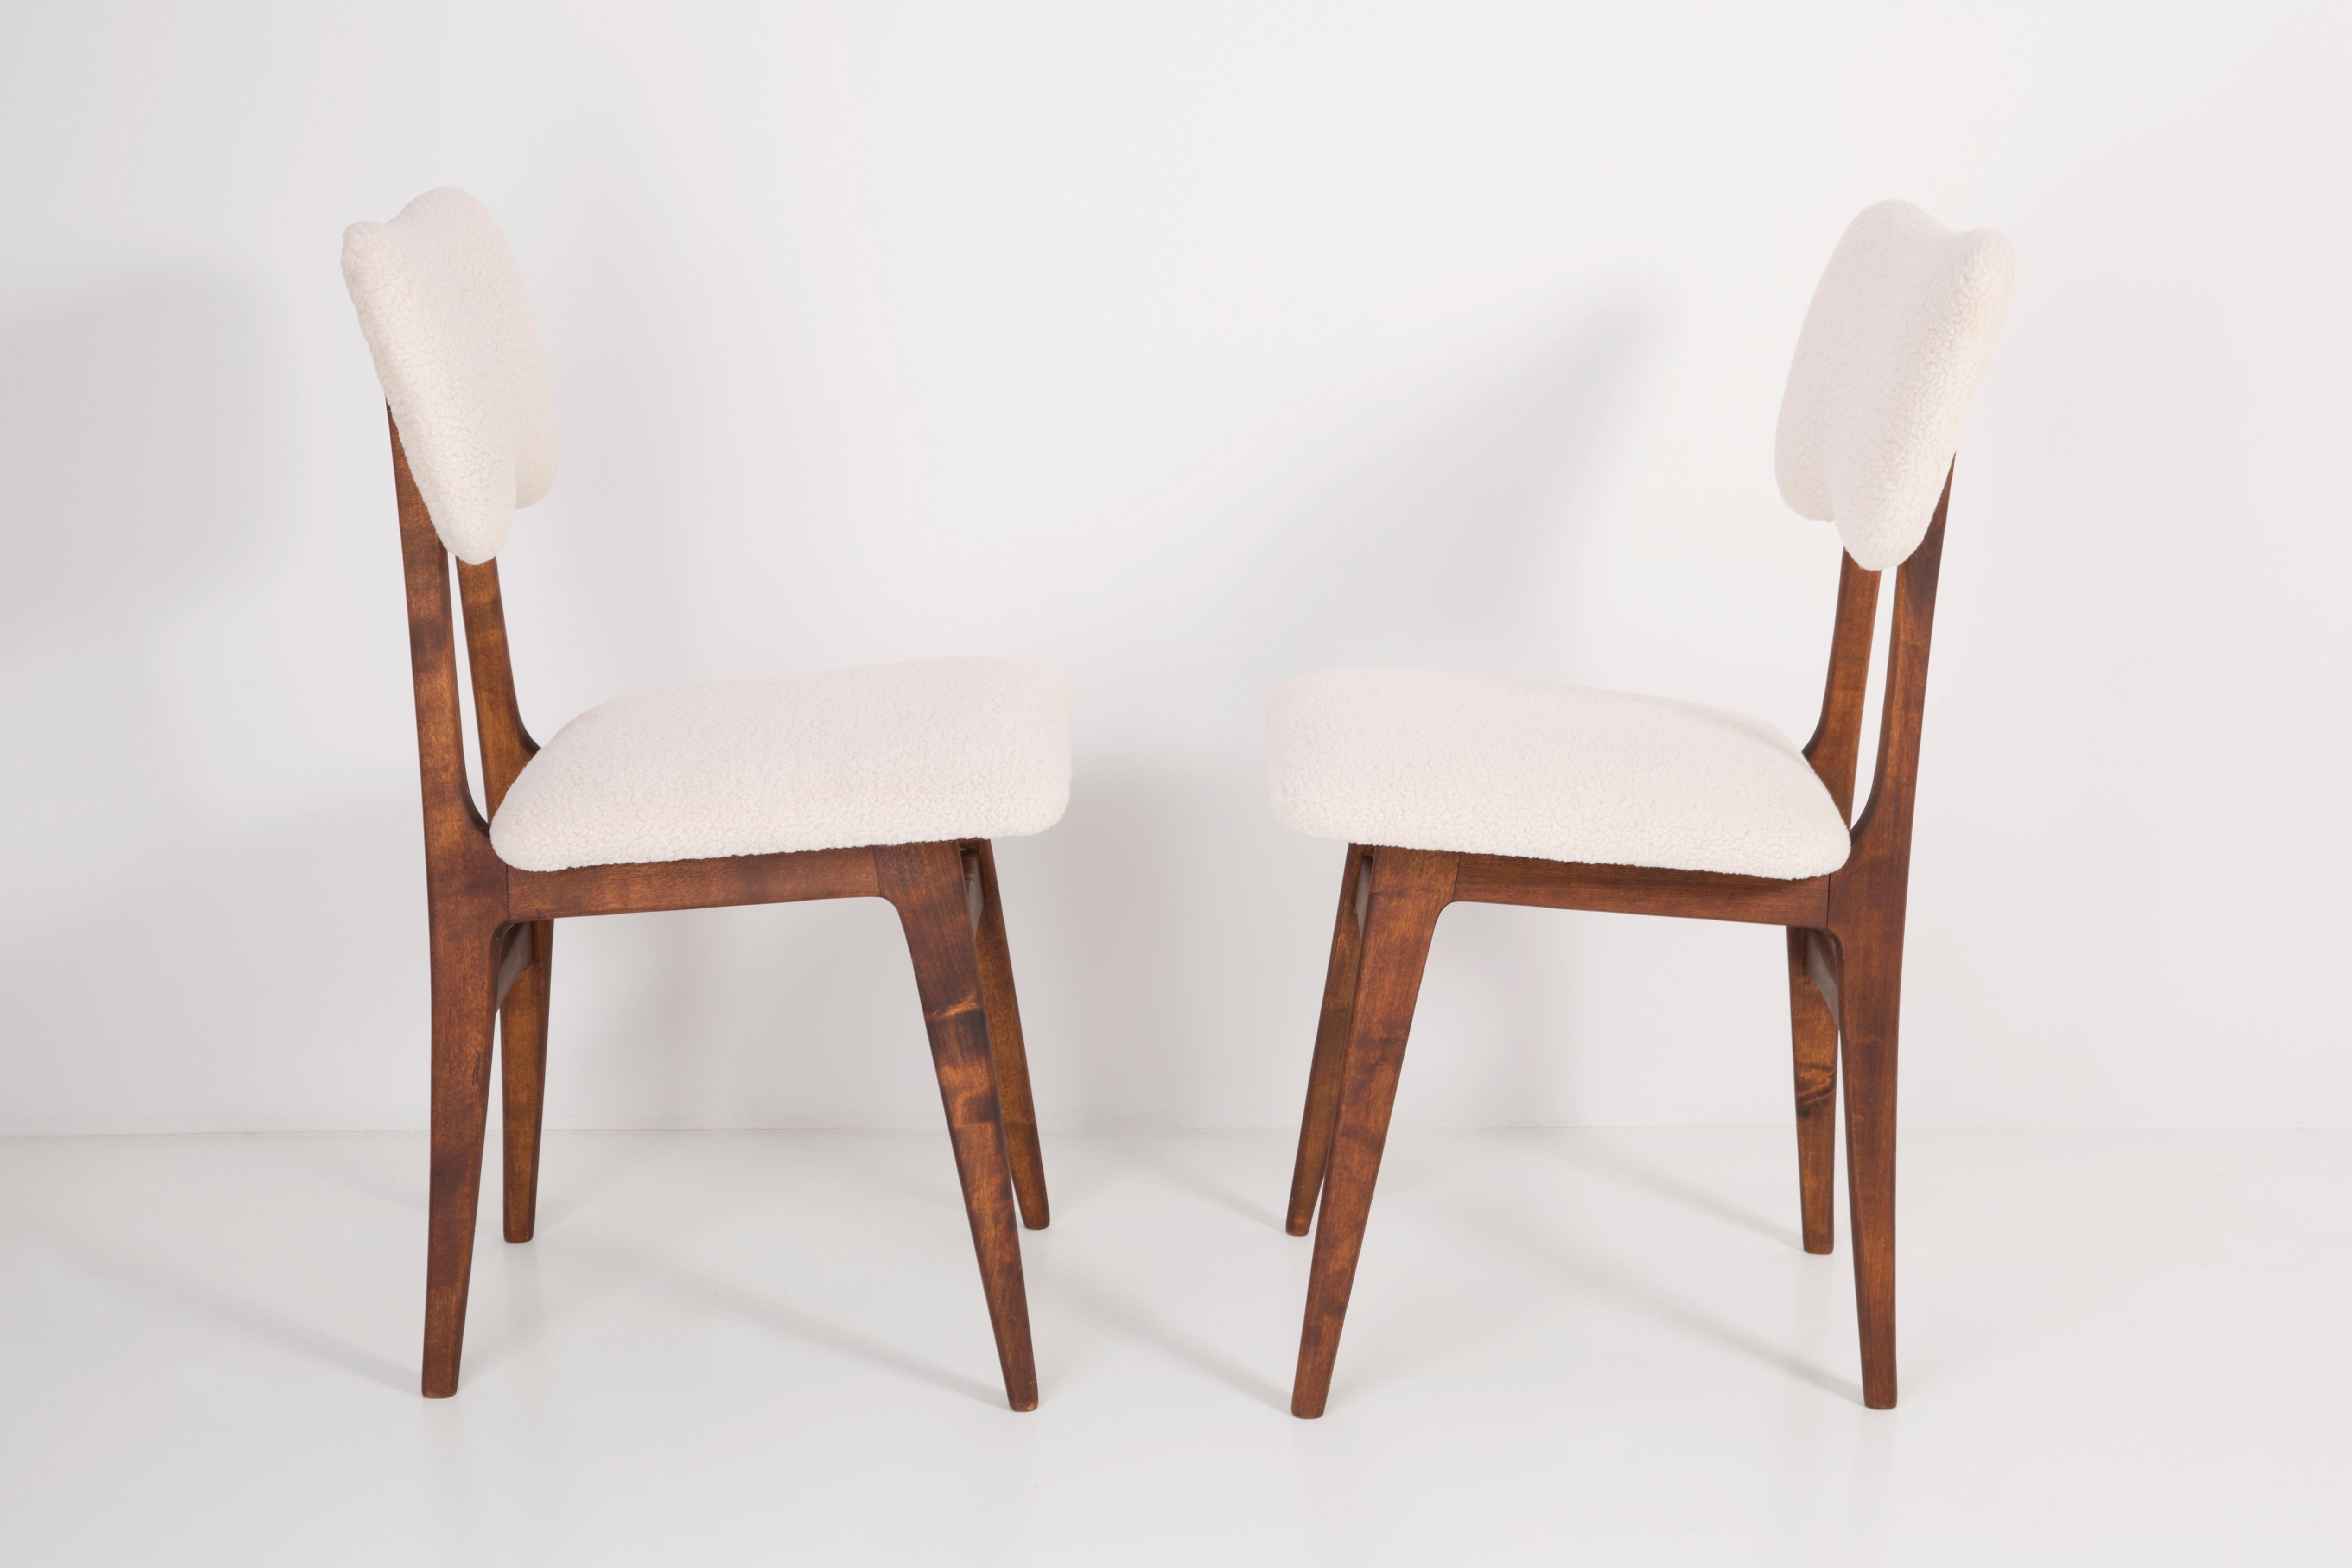 Chairs designed by Prof. Rajmund Halas. Made of beechwood. Chair is after a complete upholstery renovation, the woodwork has been refreshed. Seat and back is dressed in crème, durable and pleasant to the touch boucle fabric. Chair is stable and very